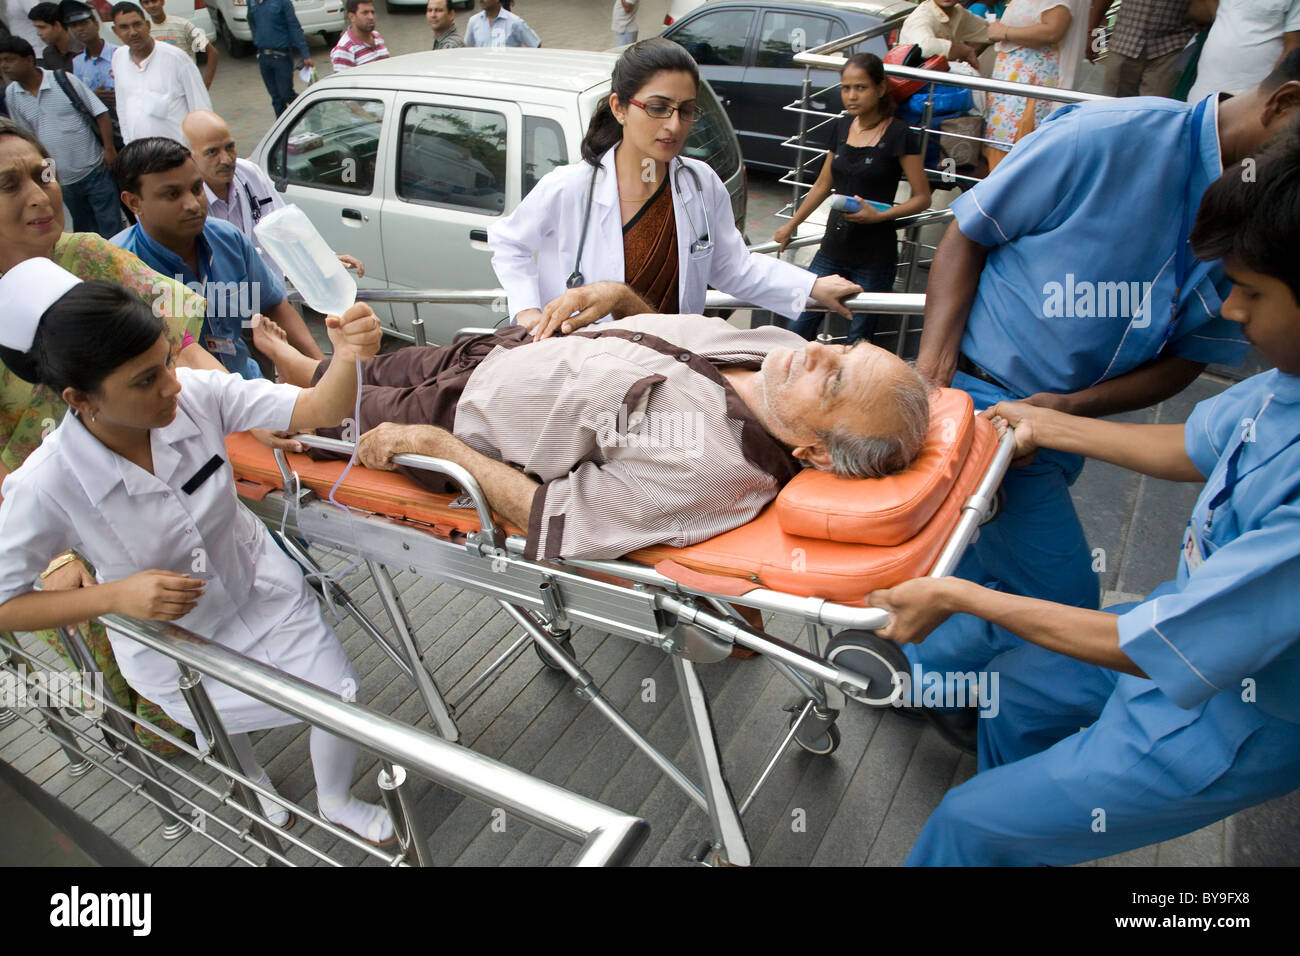 Patient going into a hospital on a stretcher Stock Photo